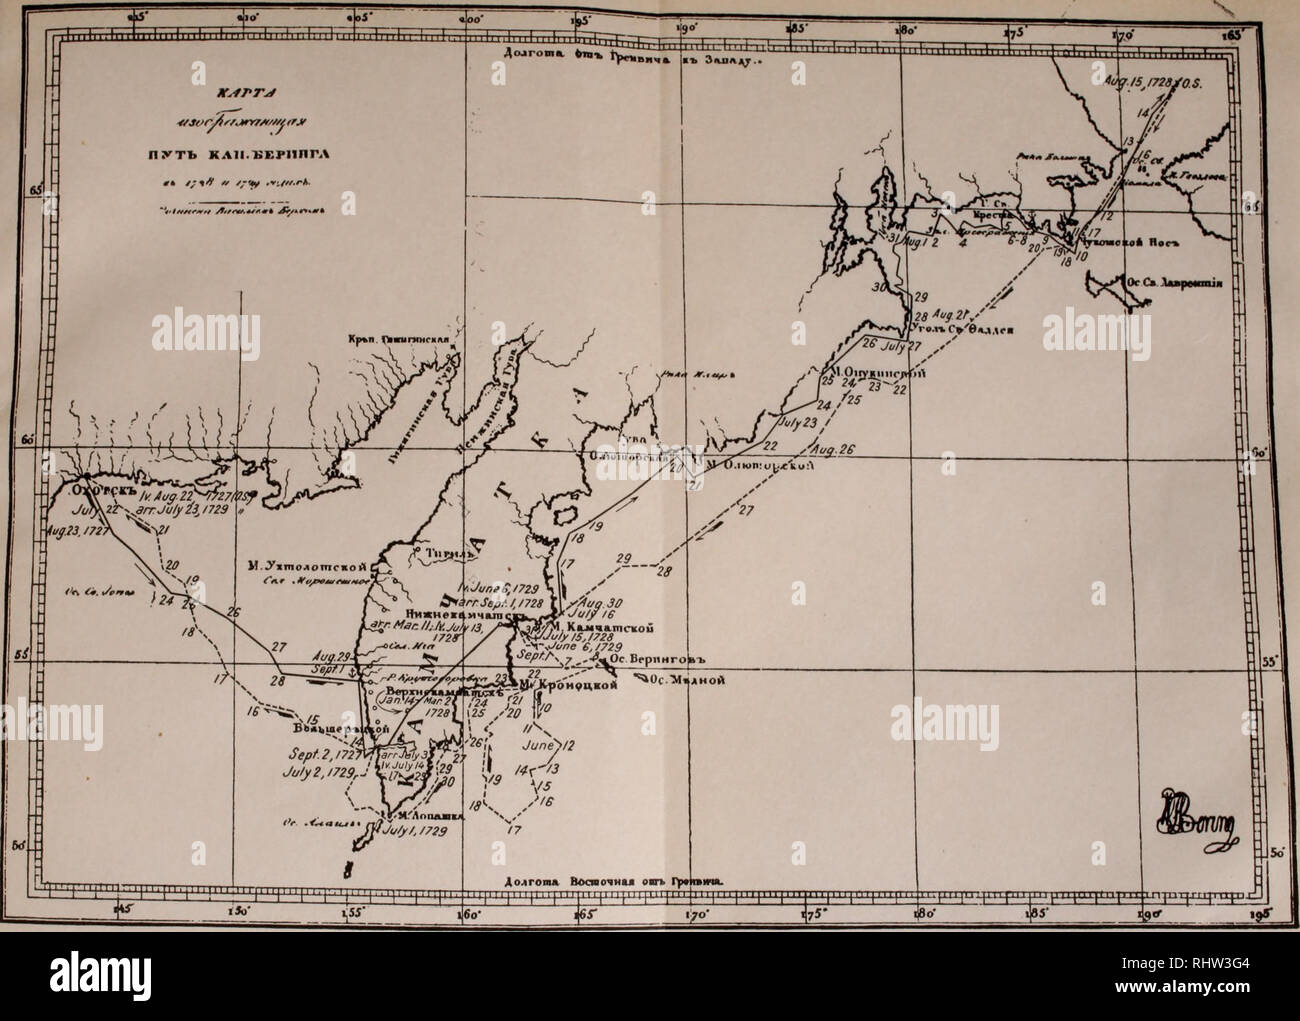 . Bering's voyages; an account of the efforts of the Russians to determine the relation of Asia and America. Bering's Expedition, 2d, 1733-1743; Kamchatskaia ekspeditsiia. Fig. 6—Facsimile of Berkh's map of 1823 Csee bibliography) showing the route of Bering's first expedition from Okhotsk to Bering Strait and return. Mean meridional scale, r: 16,000,000 (original 1:9.000,000). The dates have been identified and added from Berkh's abridged version of midshipman Peter Chaplin's log book. On sea they represent noon positions. Berkh's plotting of the ship's tracks has been slightly modified for A Stock Photo